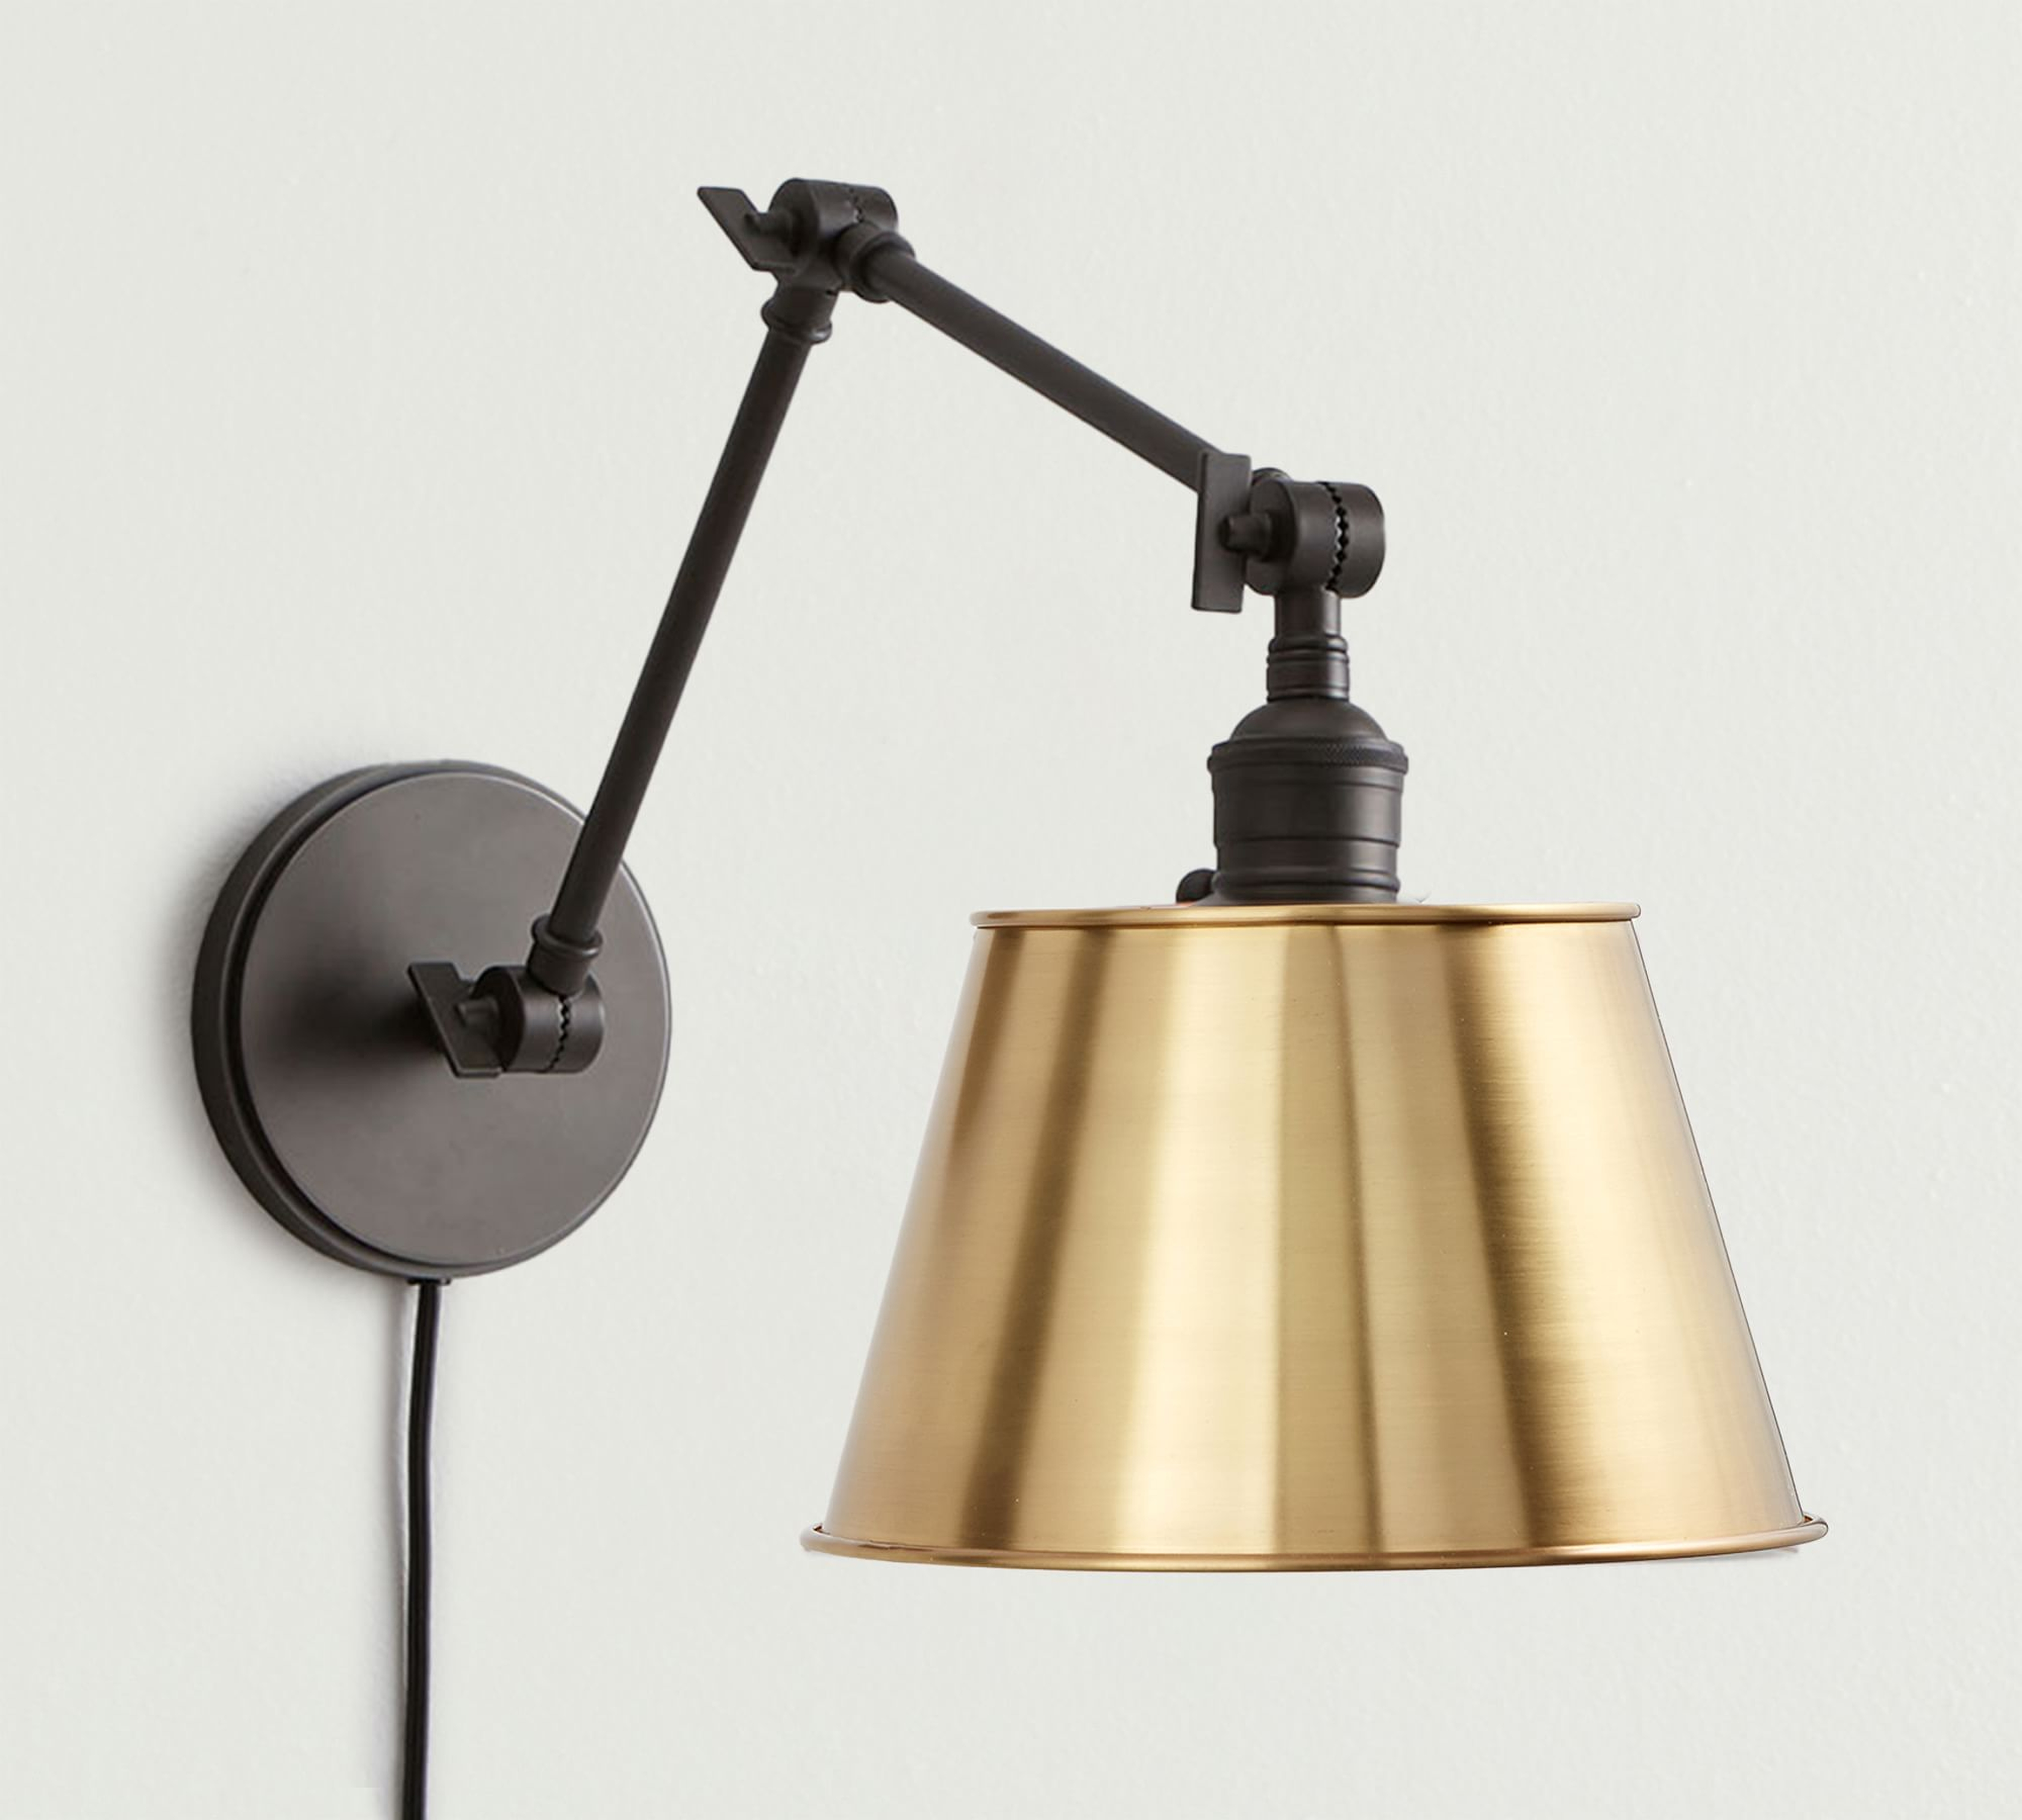 Articulating Arm Tapered Metal Shade Plug-In Sconce - Pottery Barn